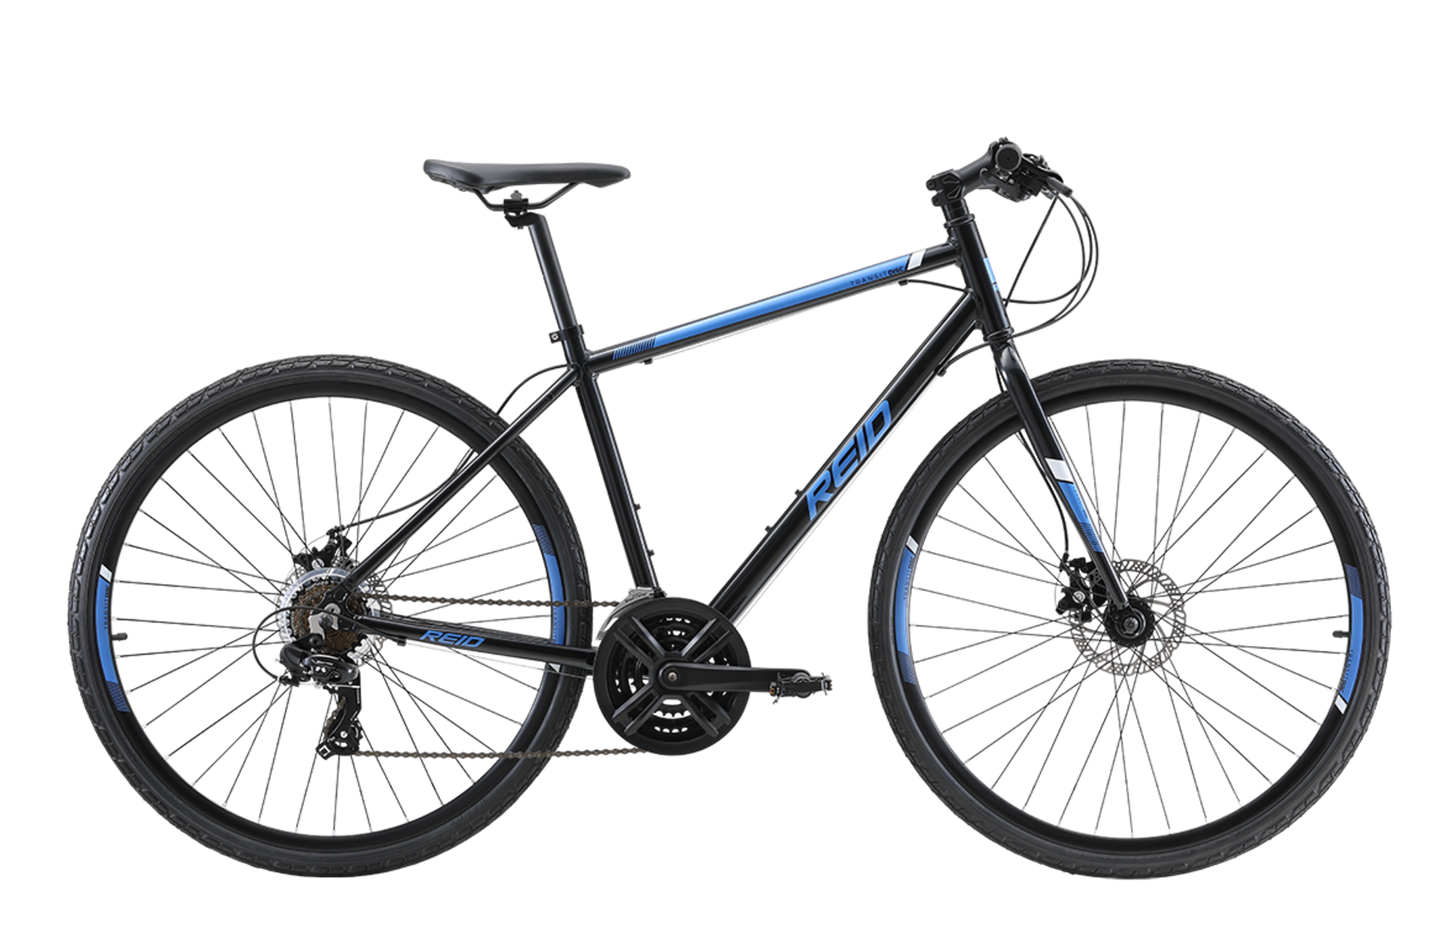 Transit Disc commuter bike in black with Shimano 7-speed gearing from Reid Cycles Australia 